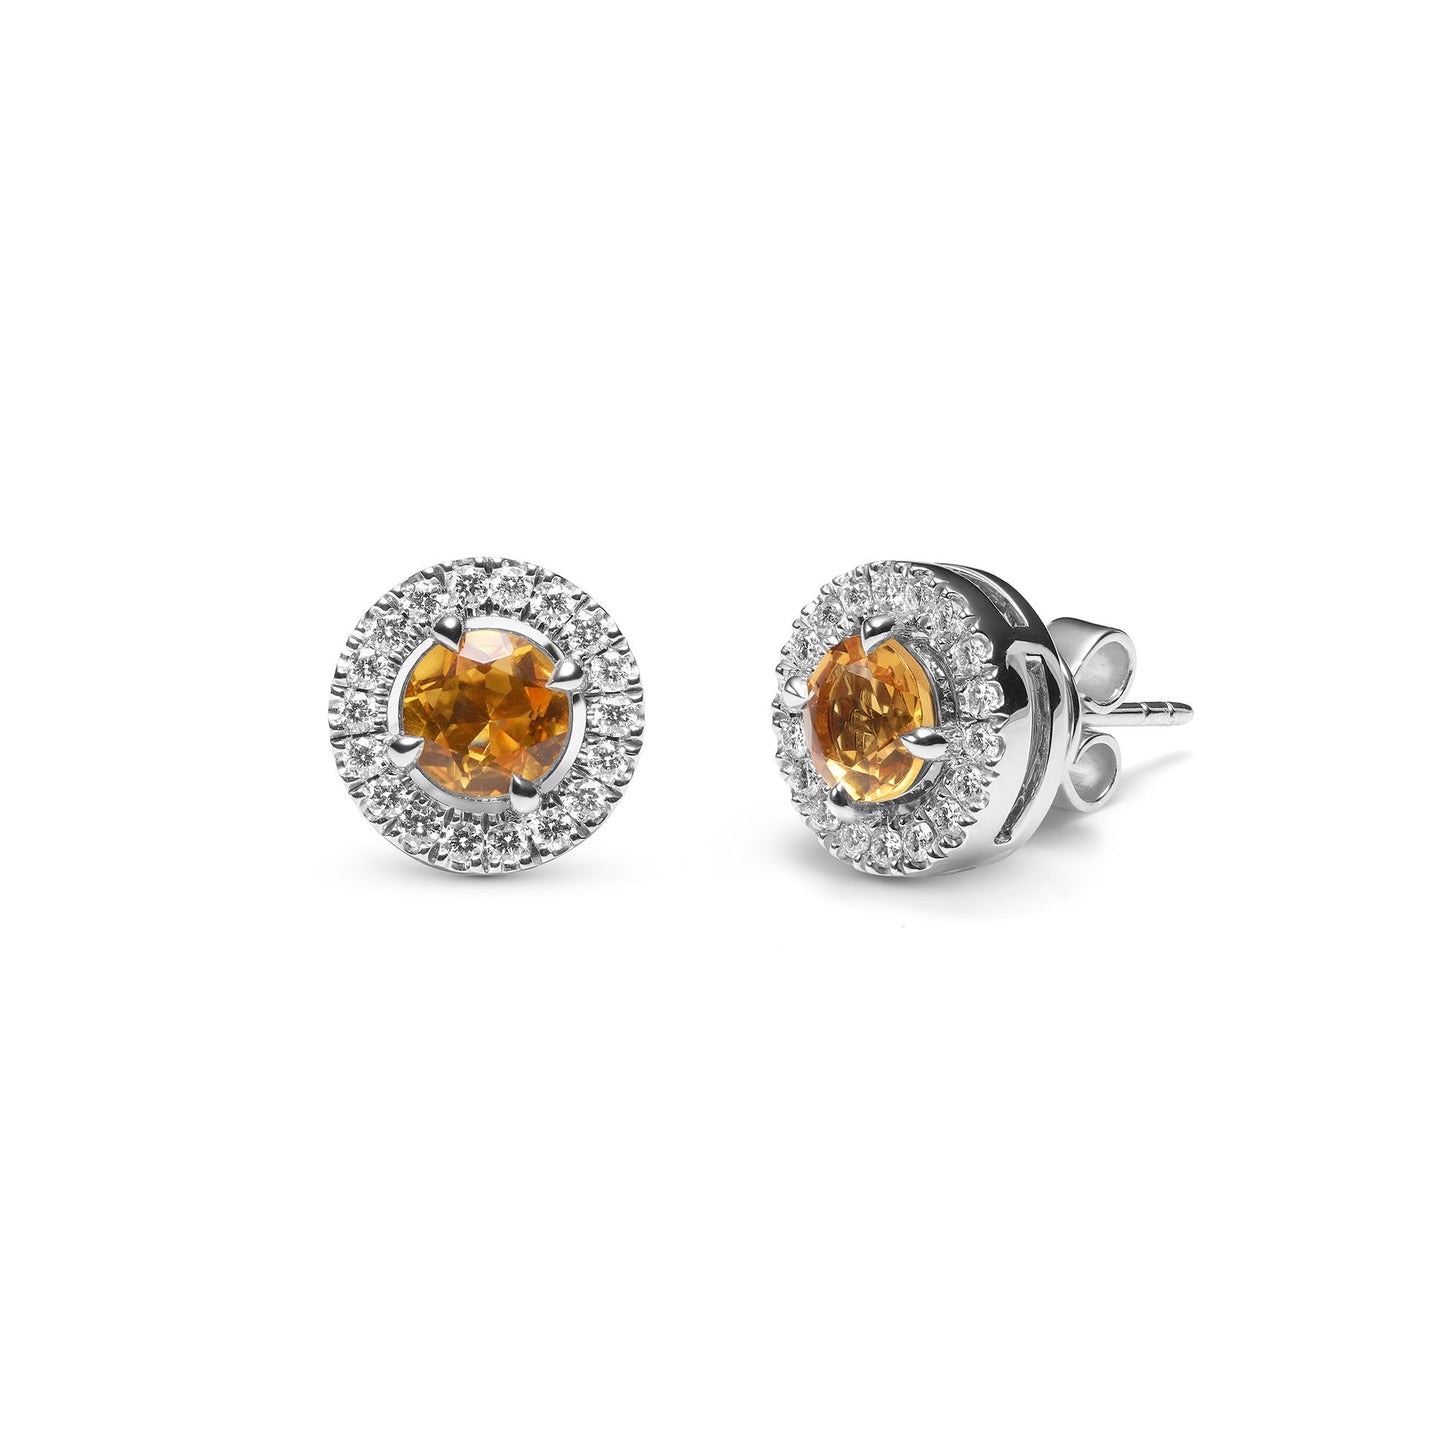 Platinum Earrings with Yellow Citrine and Diamonds